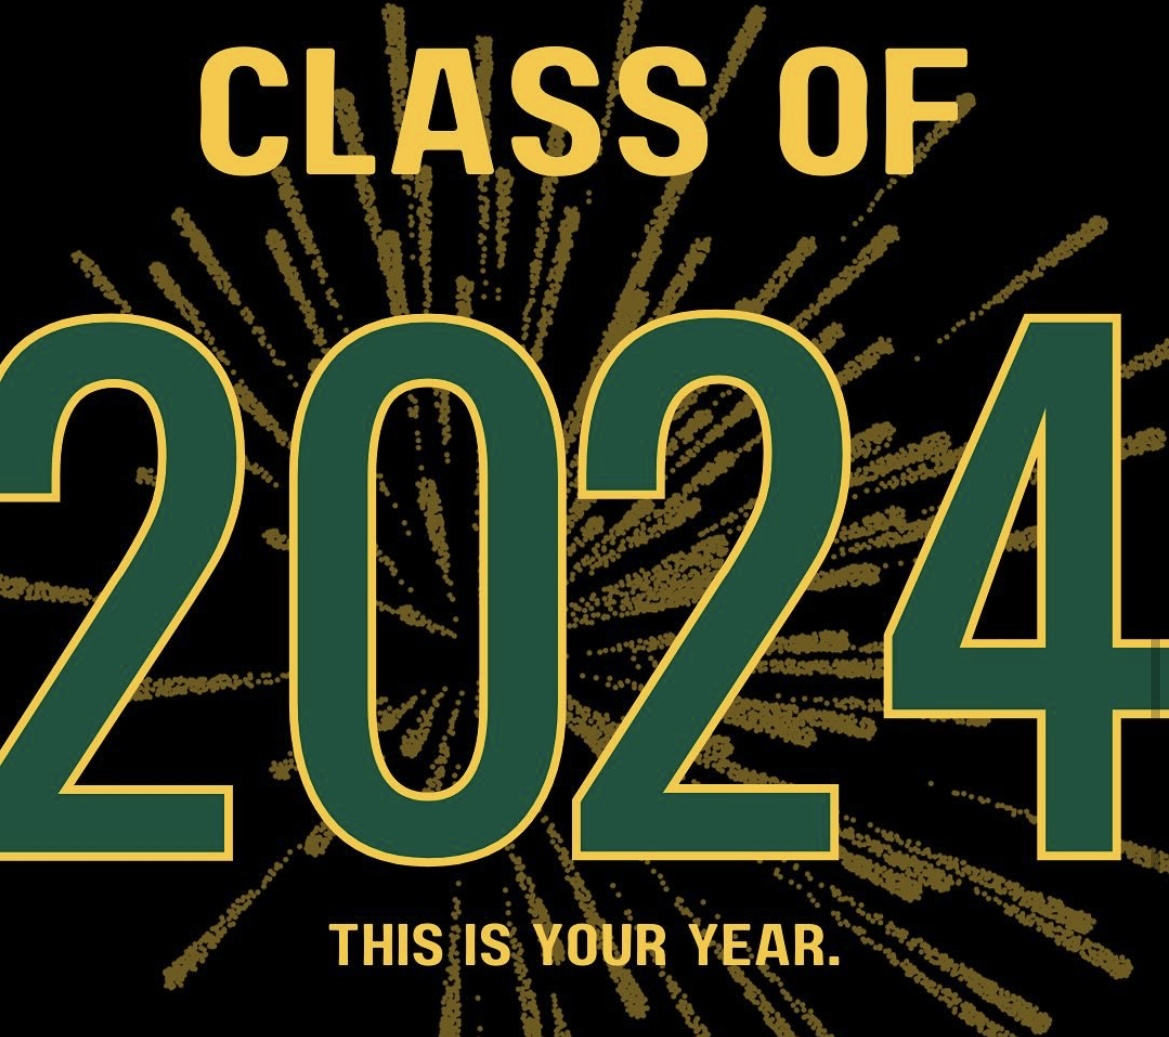 Photo Credit: Brockport Class of 2024 Instagram Page